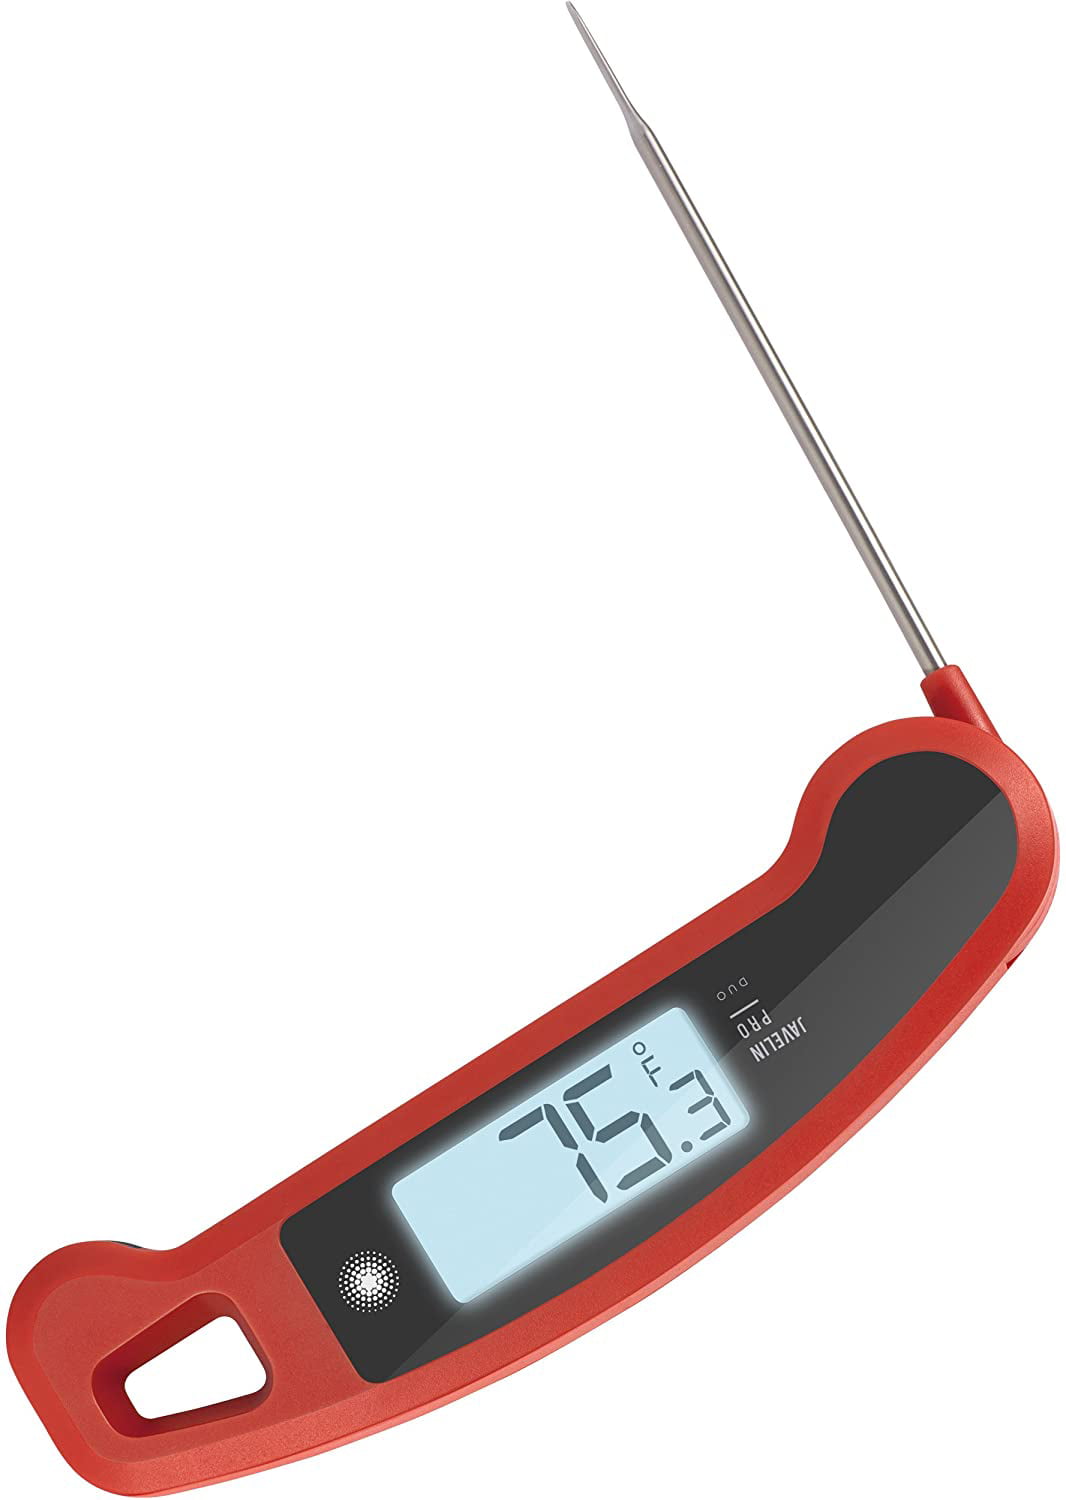 Lavatools Pt18c Professional Commercial 3 Ambidextrous Backlit Digital Instant Read Meat Thermometer for Kitchen, Food Cooking, Grill, BBQ, Smoker, C